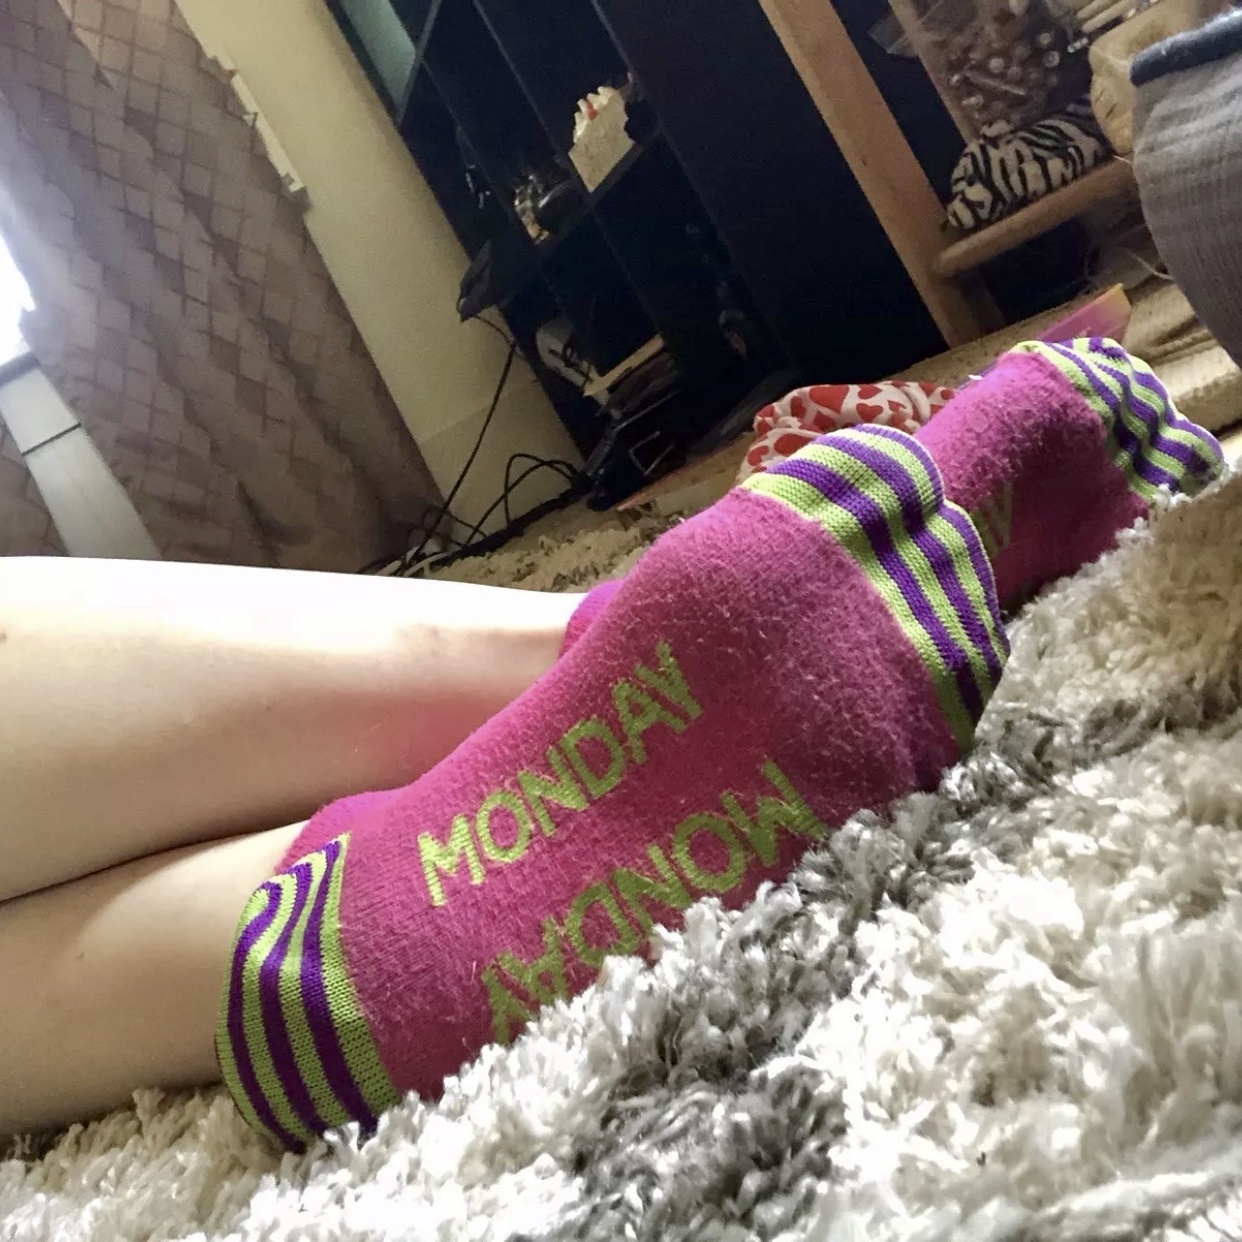 Onlyforyou: used dirty socks available from multiple ladies.